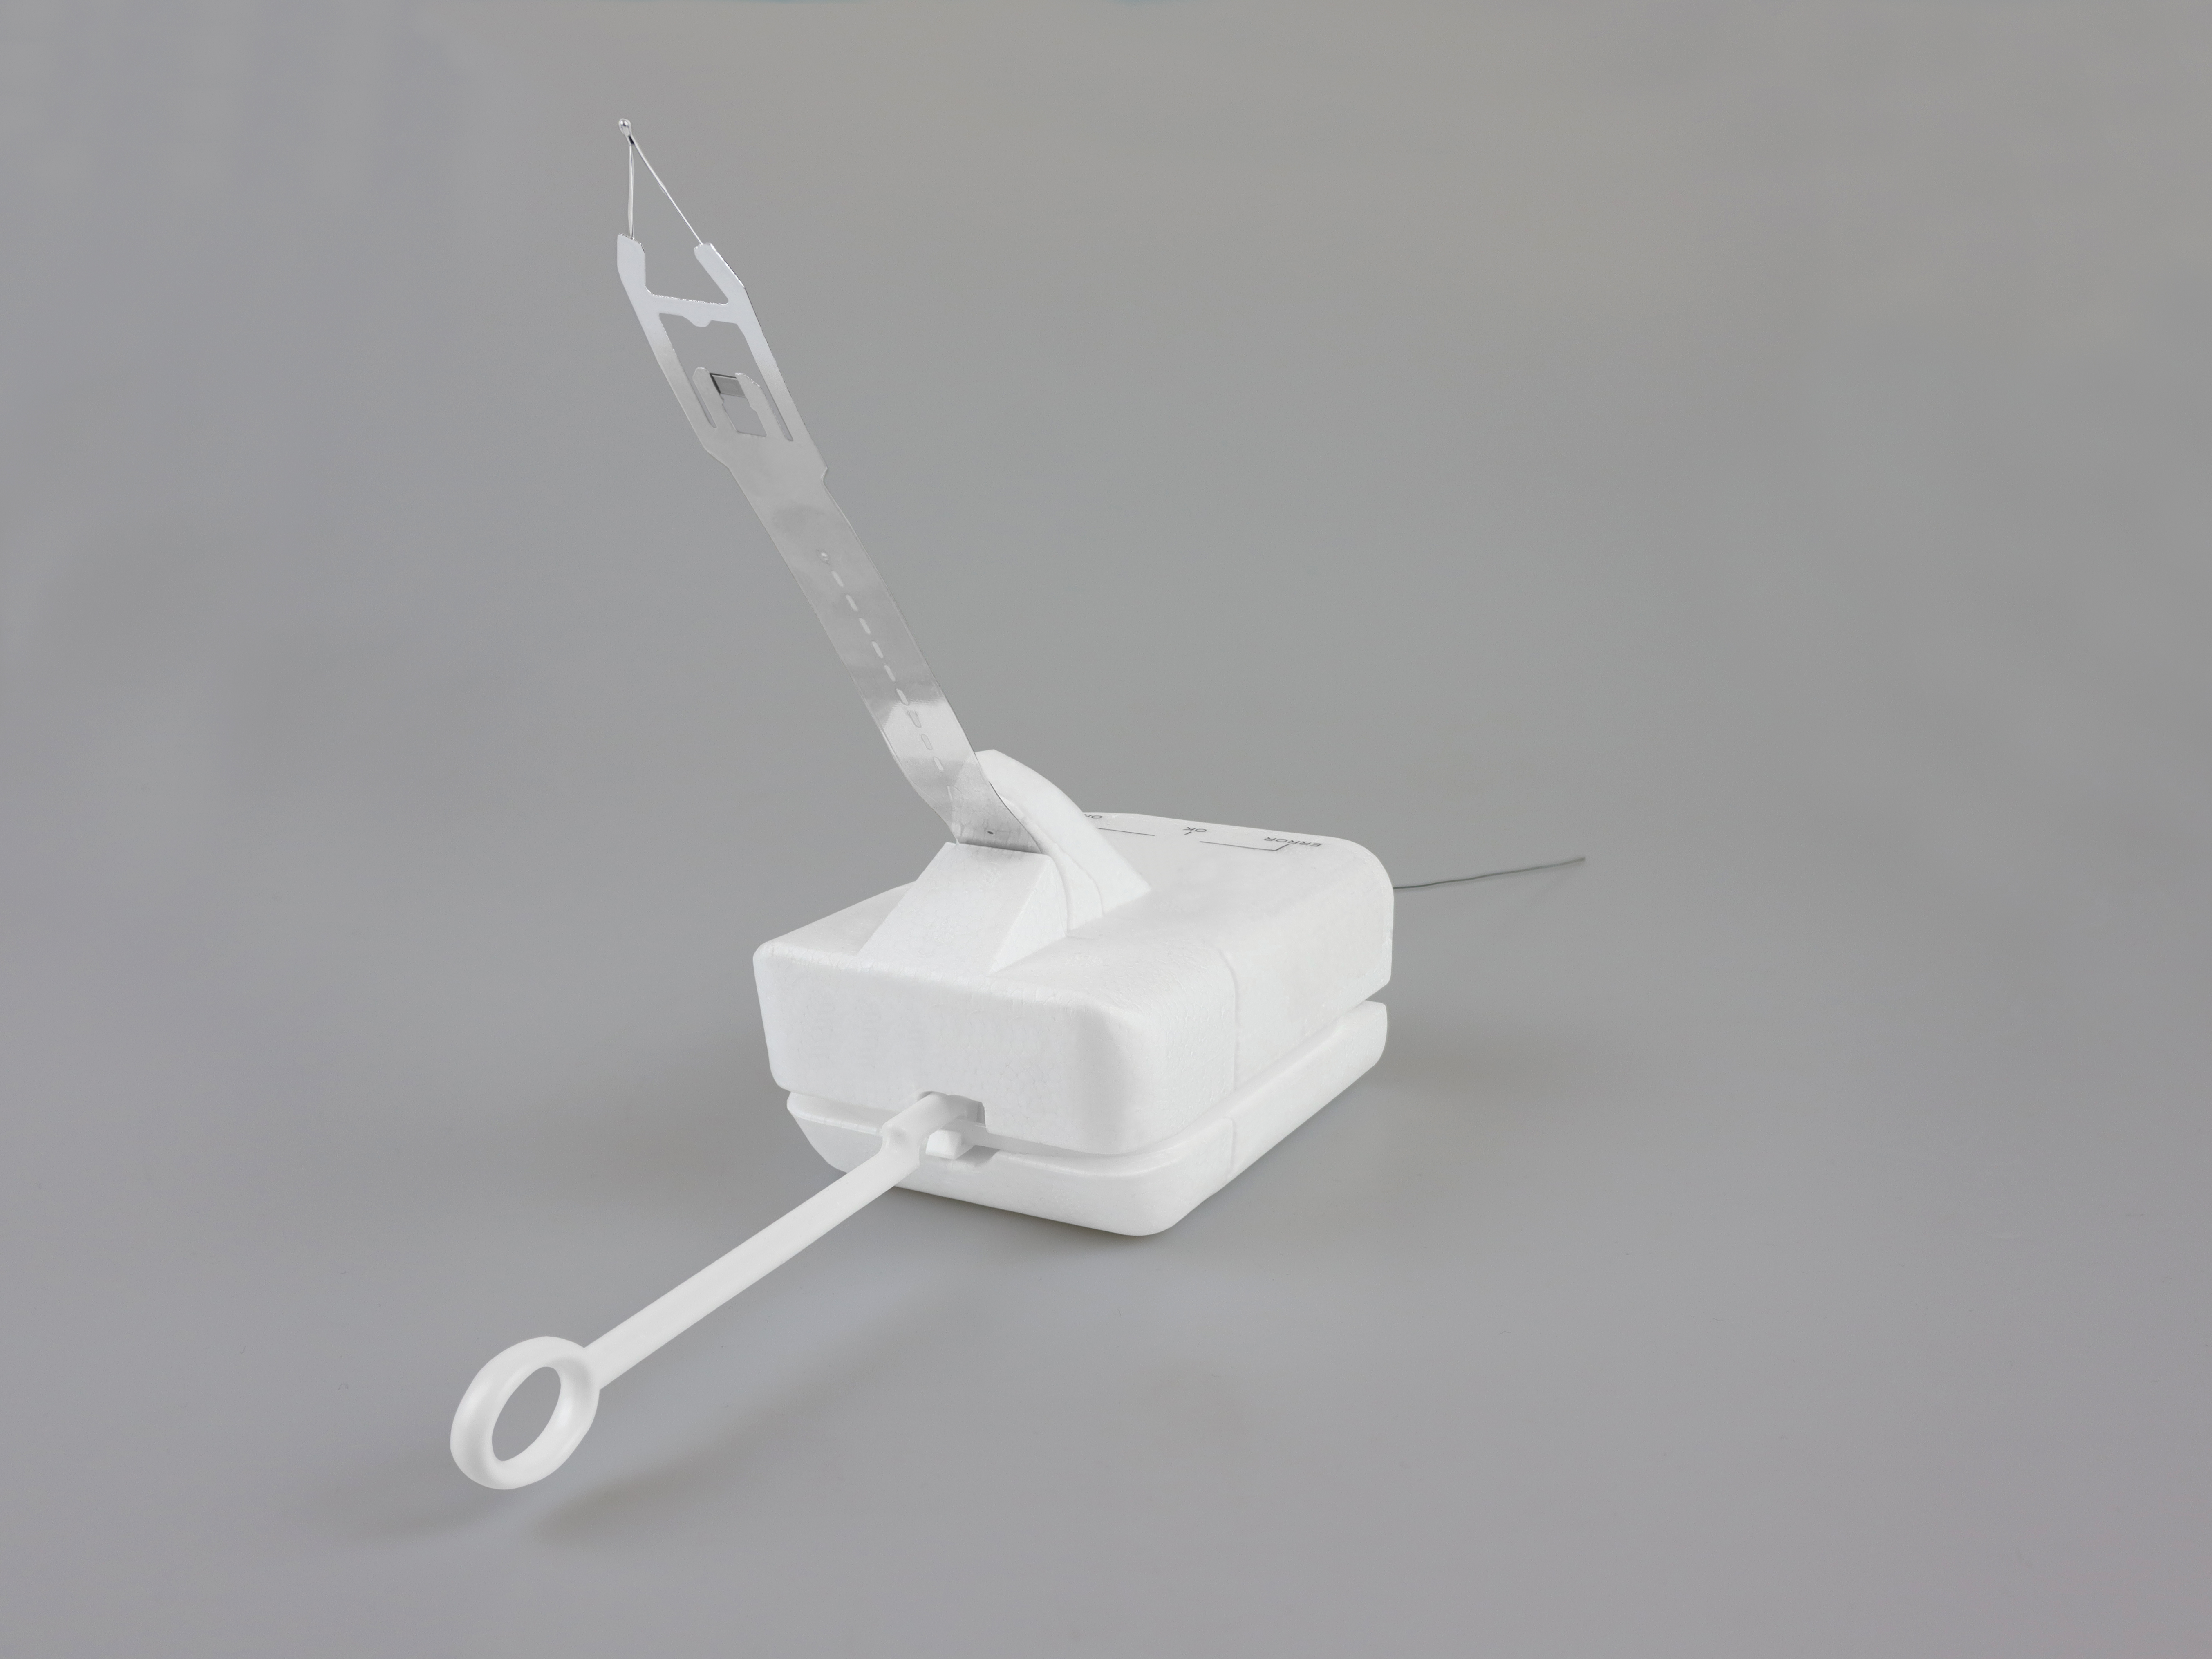 The image shows a white Graw DFM-17 radiosonde laying on a grey background